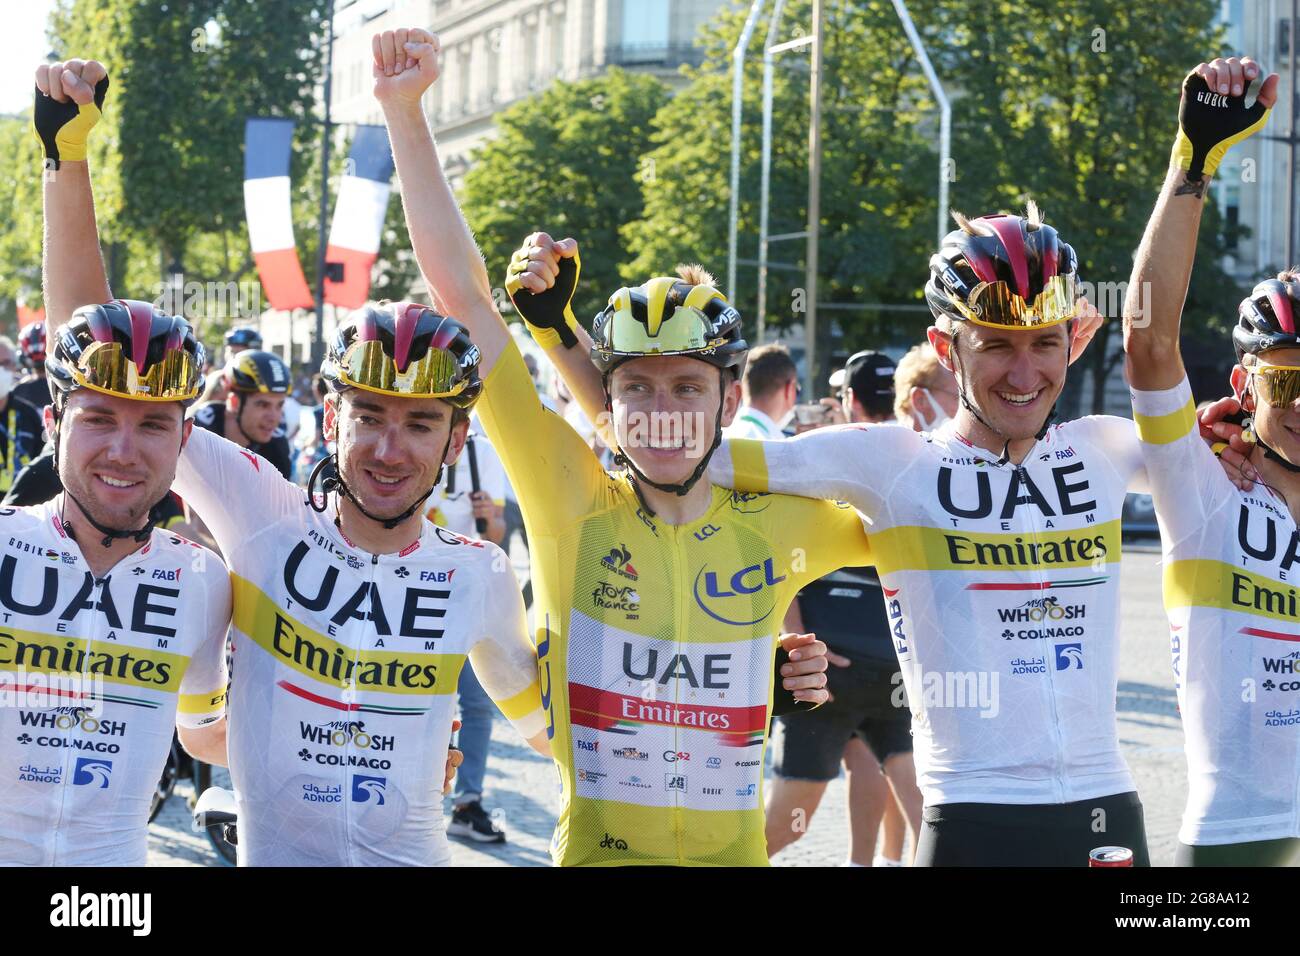 Winner yellow jersey Slovenian Tadej Pogacar of UAE Team Emirates during  the final stage of the 108th edition of the Tour de France cycling race,  108km from Chatou to Paris, in France,